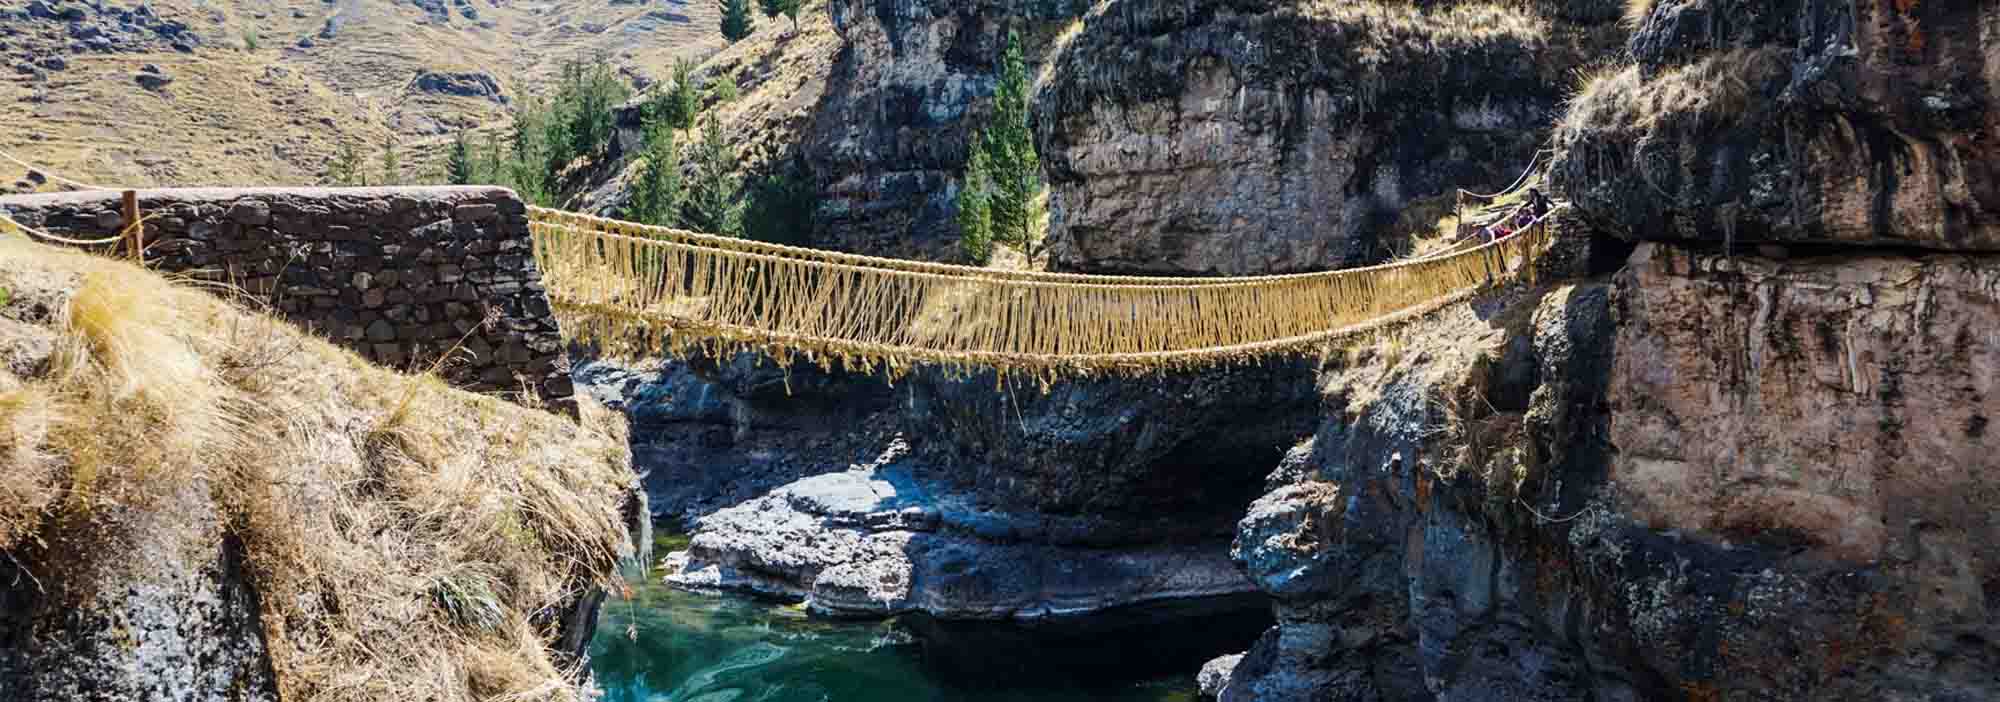  undefined | Peru's Incan Rope Bridges On The Thread of Dissapearing